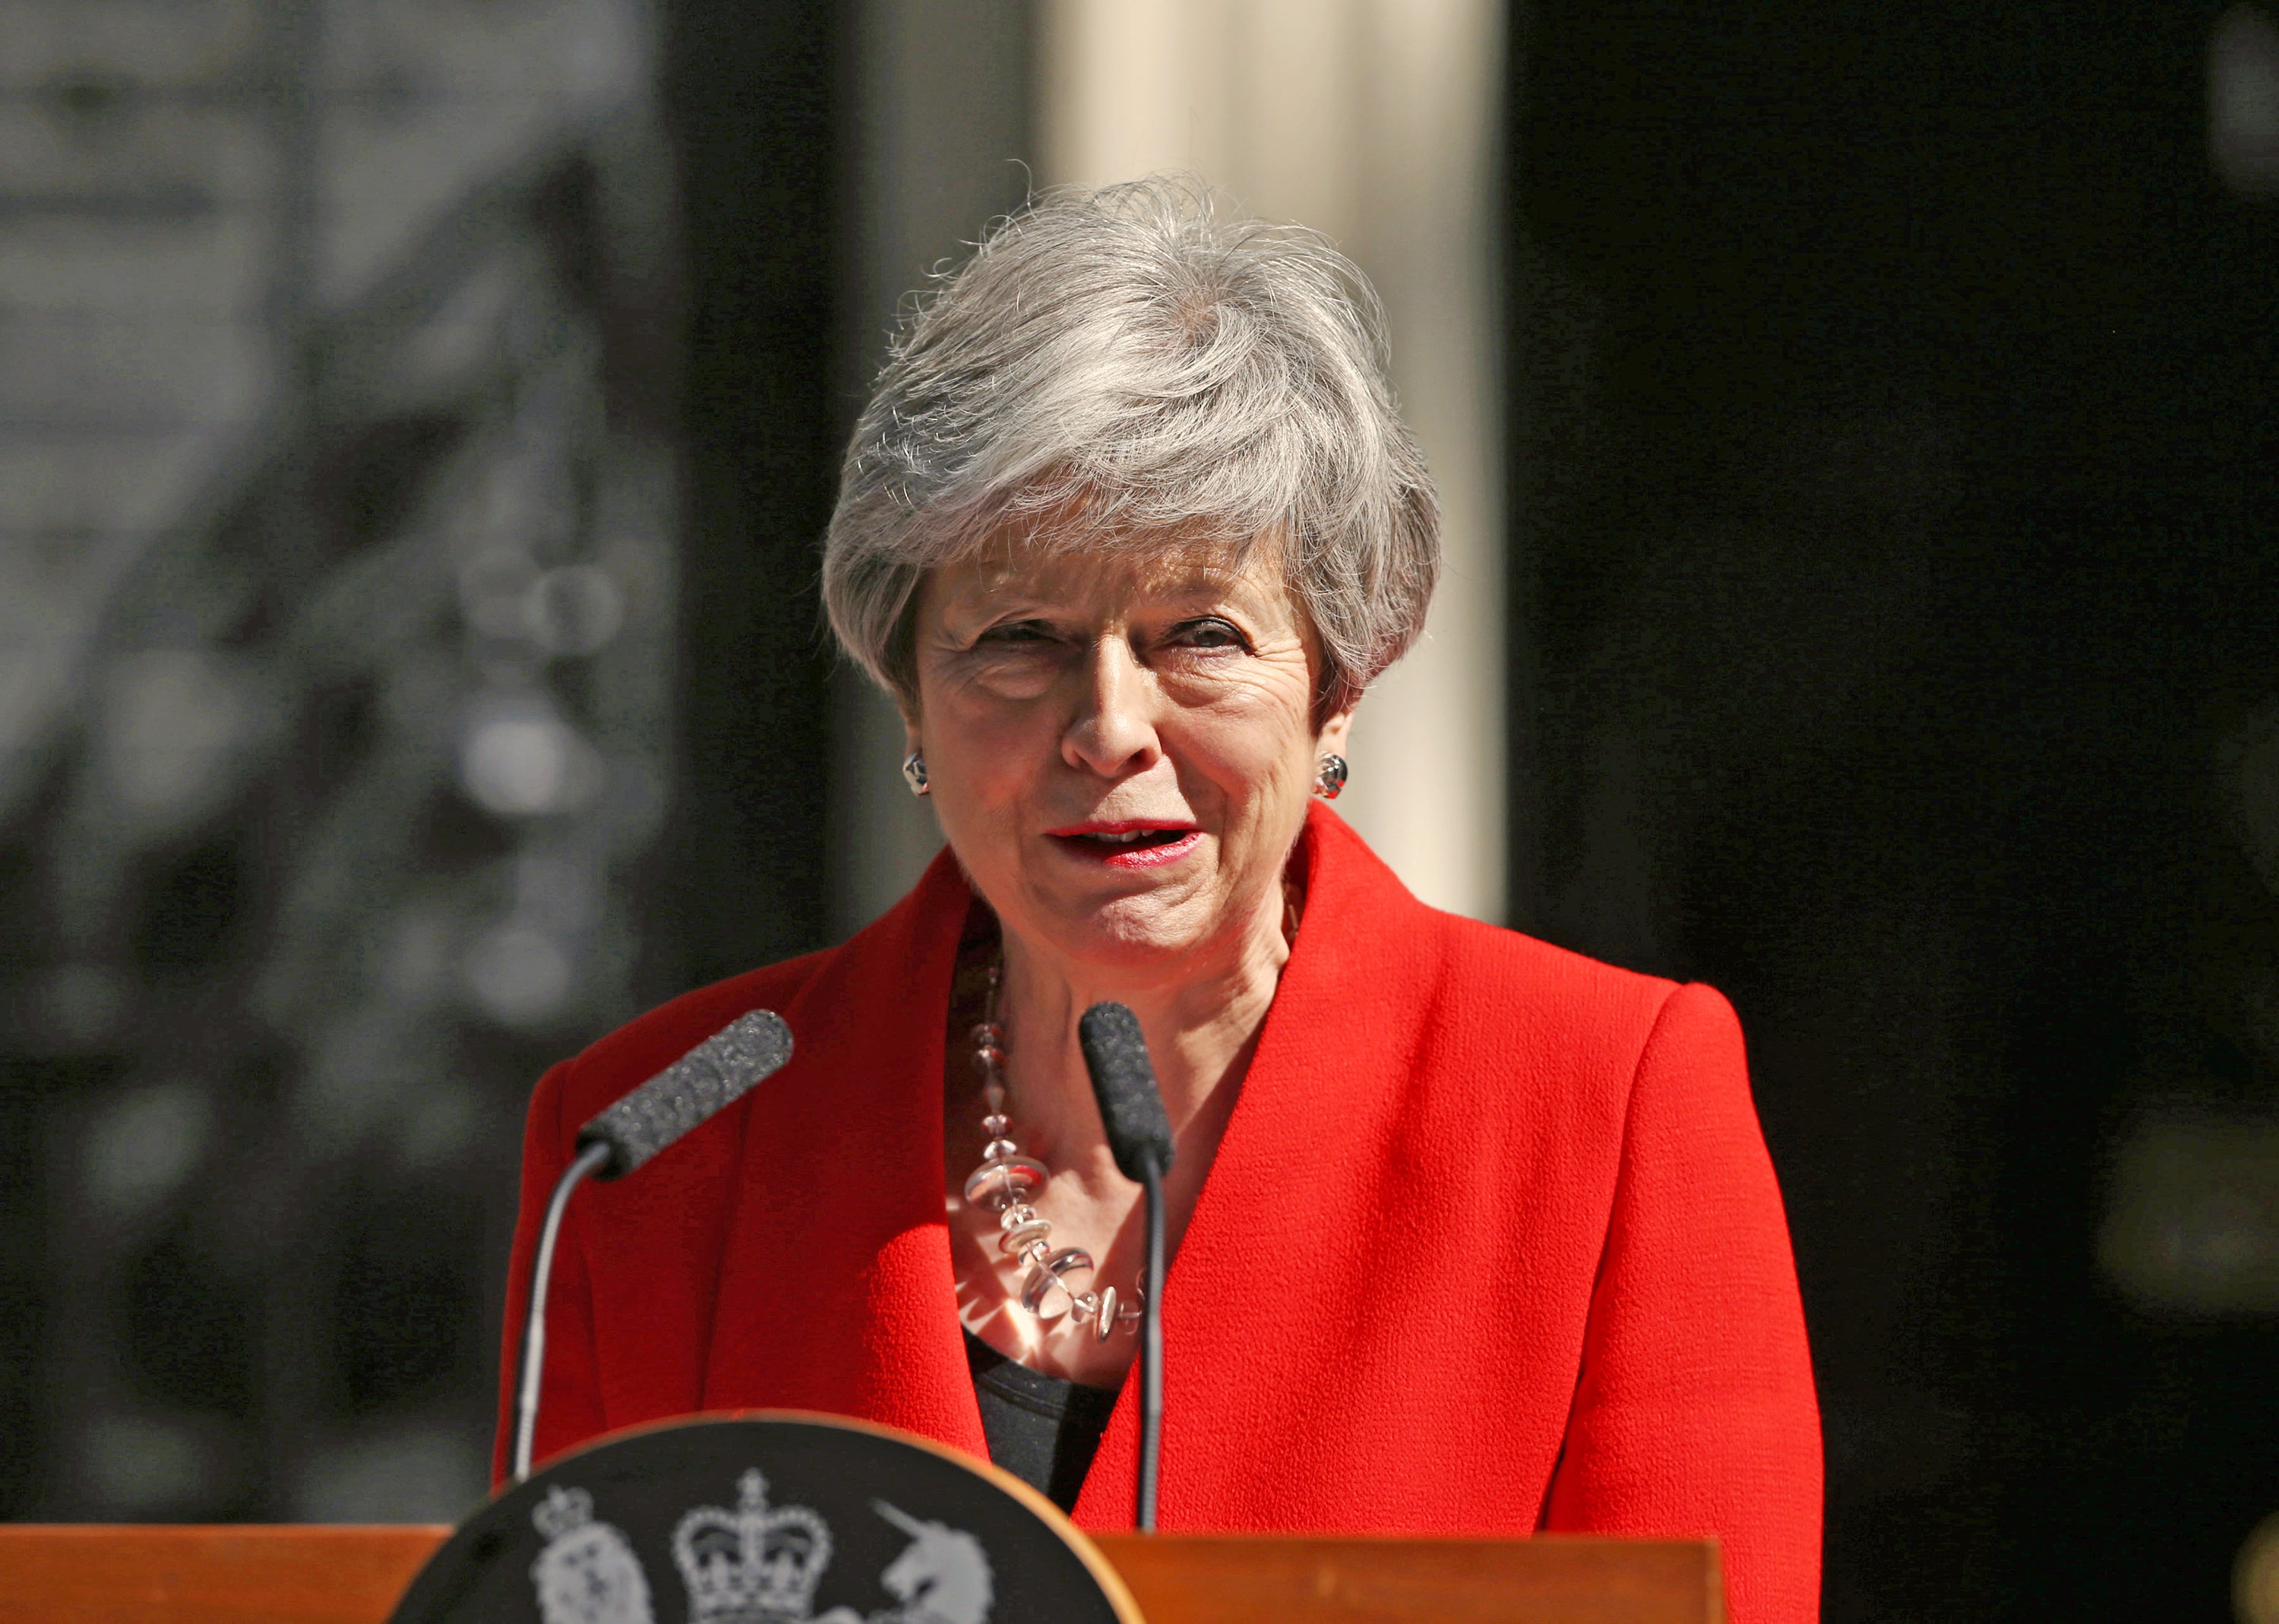 ‘Had she been prime minister during the Covid pandemic, I have no doubt she would have been a calm, sensible and efficient leader’